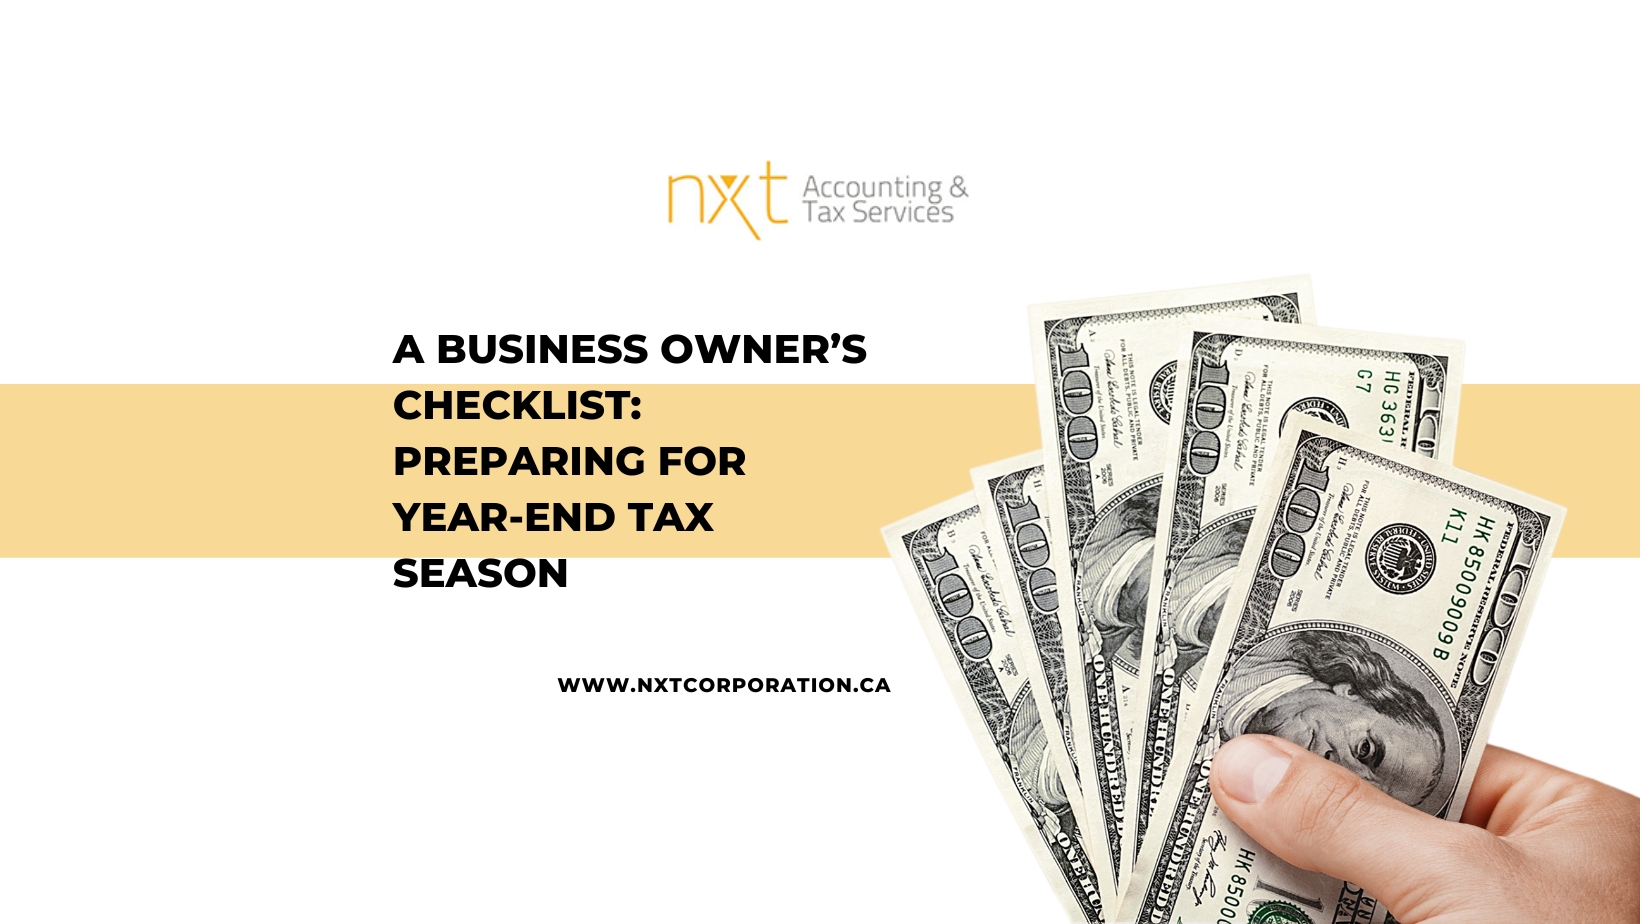 A Business Owner’s Checklist- Preparing for Year-End Tax Season